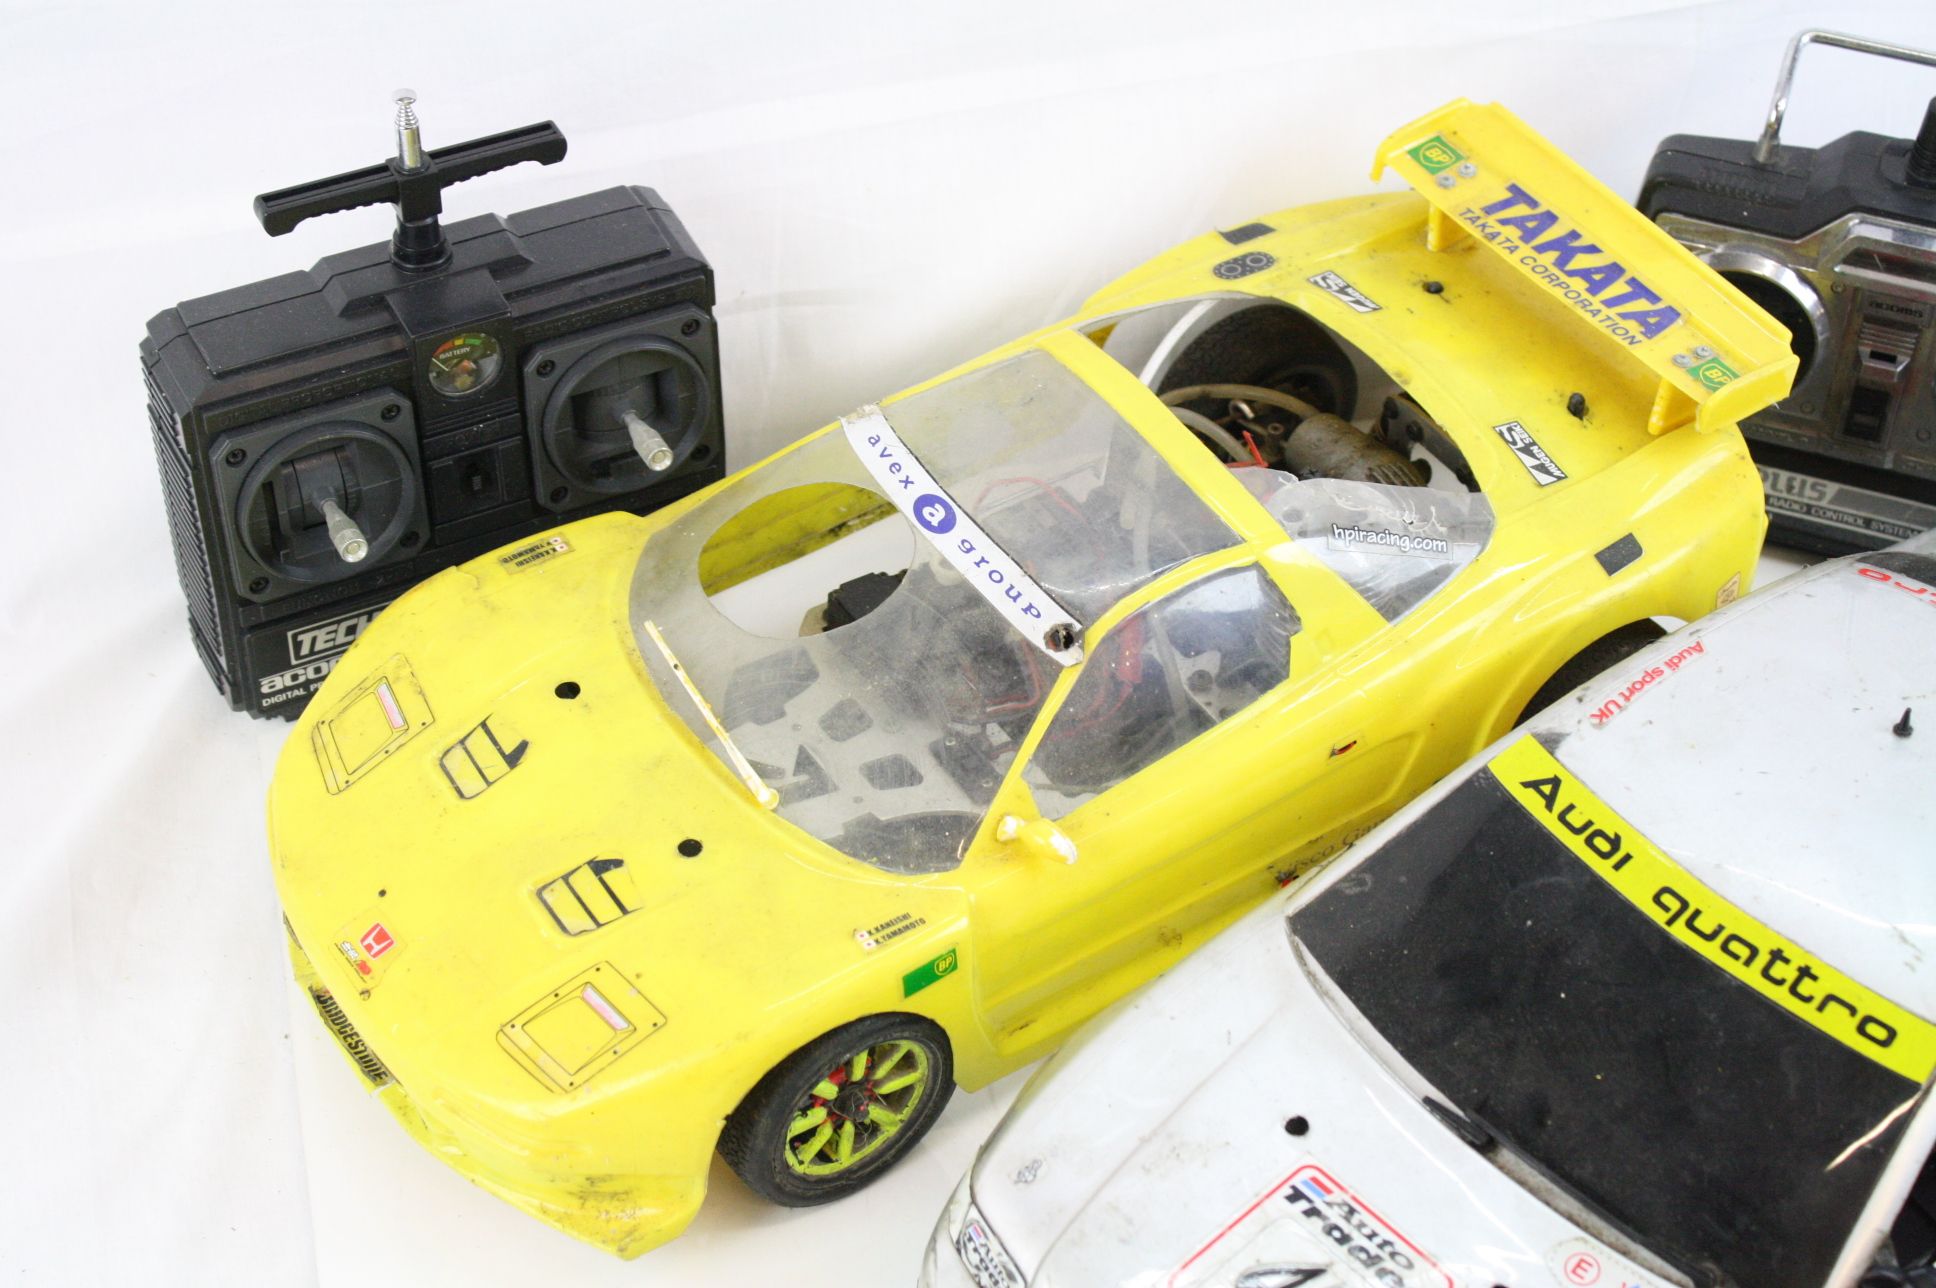 A Kyosho Nitro 4WD remote control car on an alloy chassis with a belt driven GX11X engine and a - Image 7 of 8